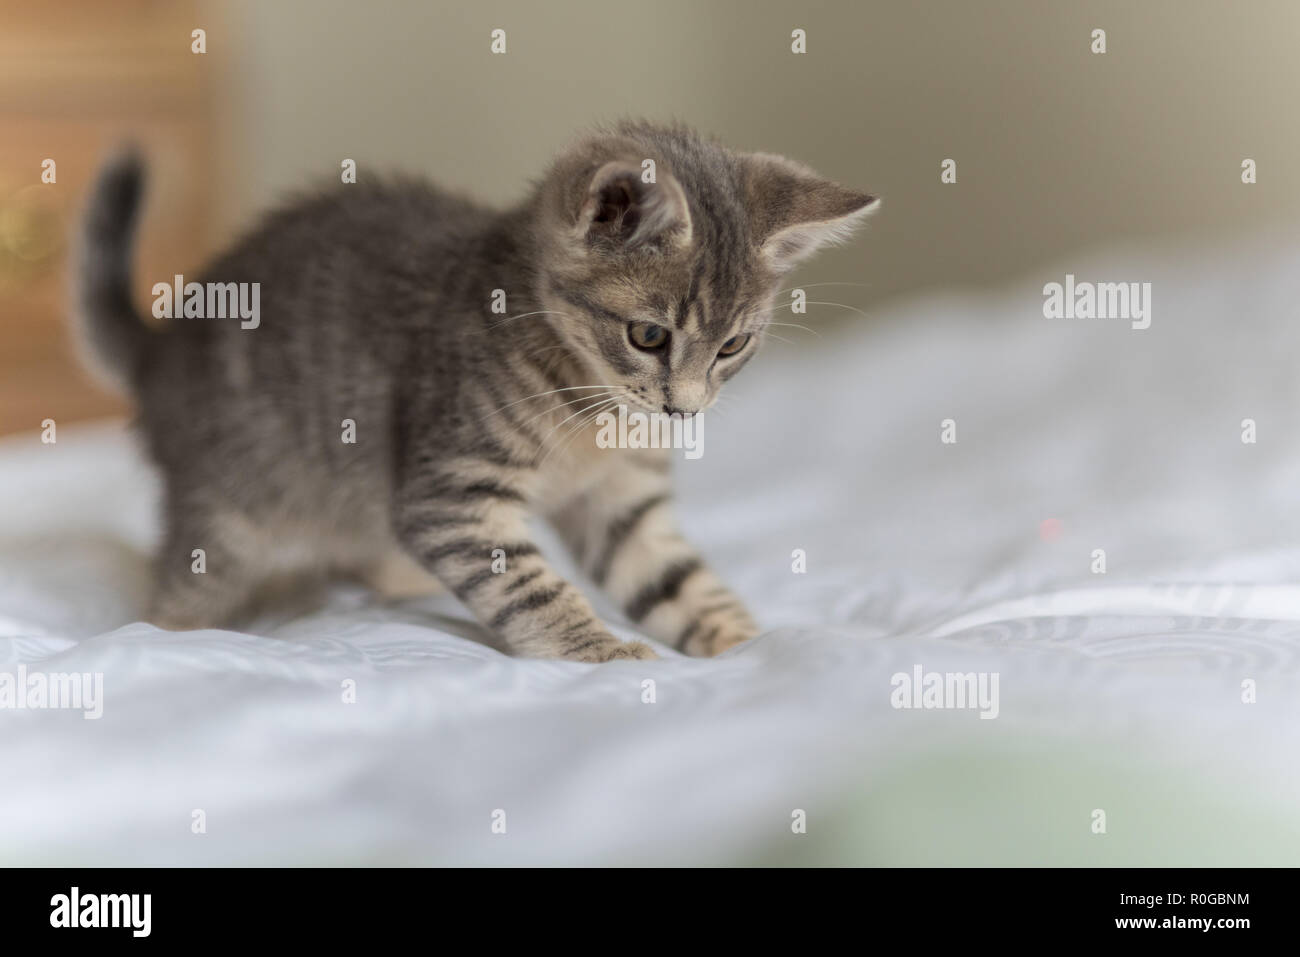 Adorable and playful grey tabby kitten pouncing on the bed with furry paws. Stock Photo